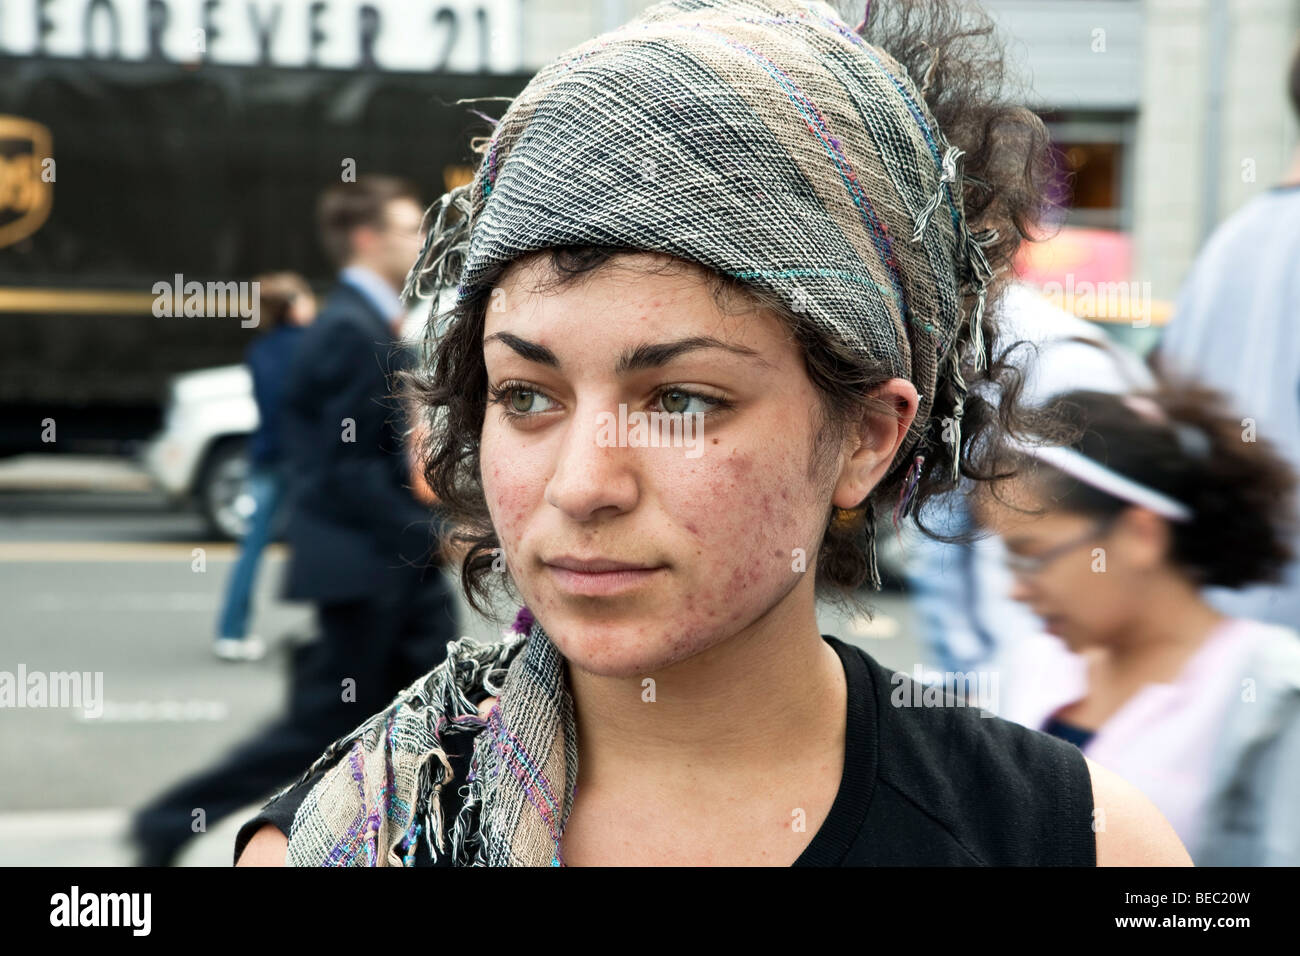 pretty young girl wearing headscarf with beautiful eyes & acne scars in Union Square 14th Street Manhattan New York City Stock Photo